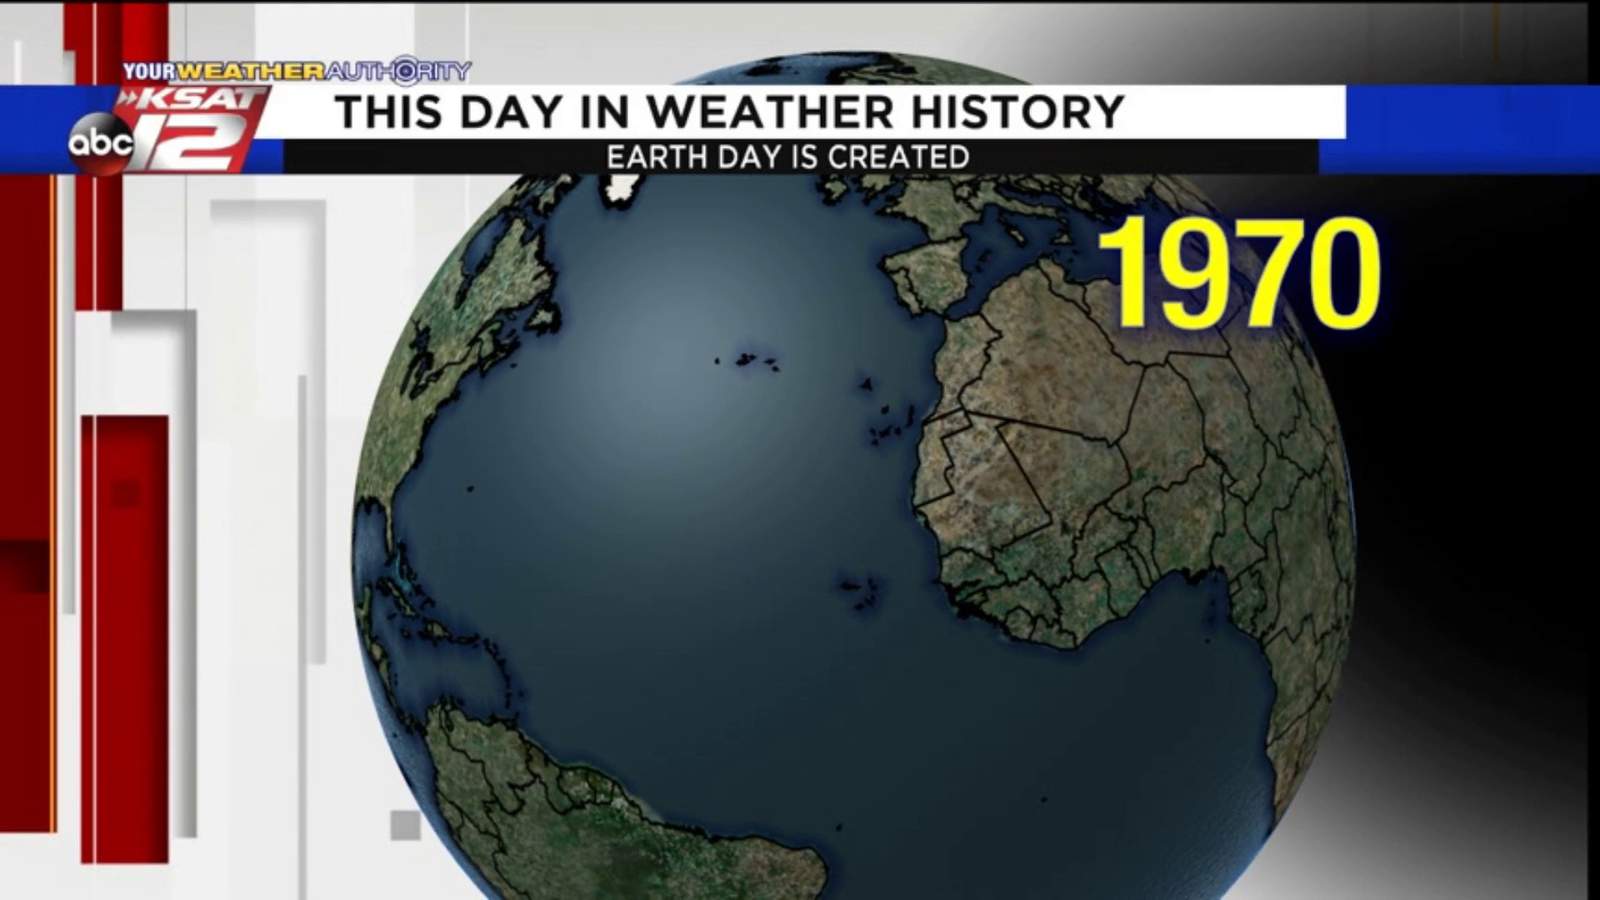 This Day in Weather History April 22nd